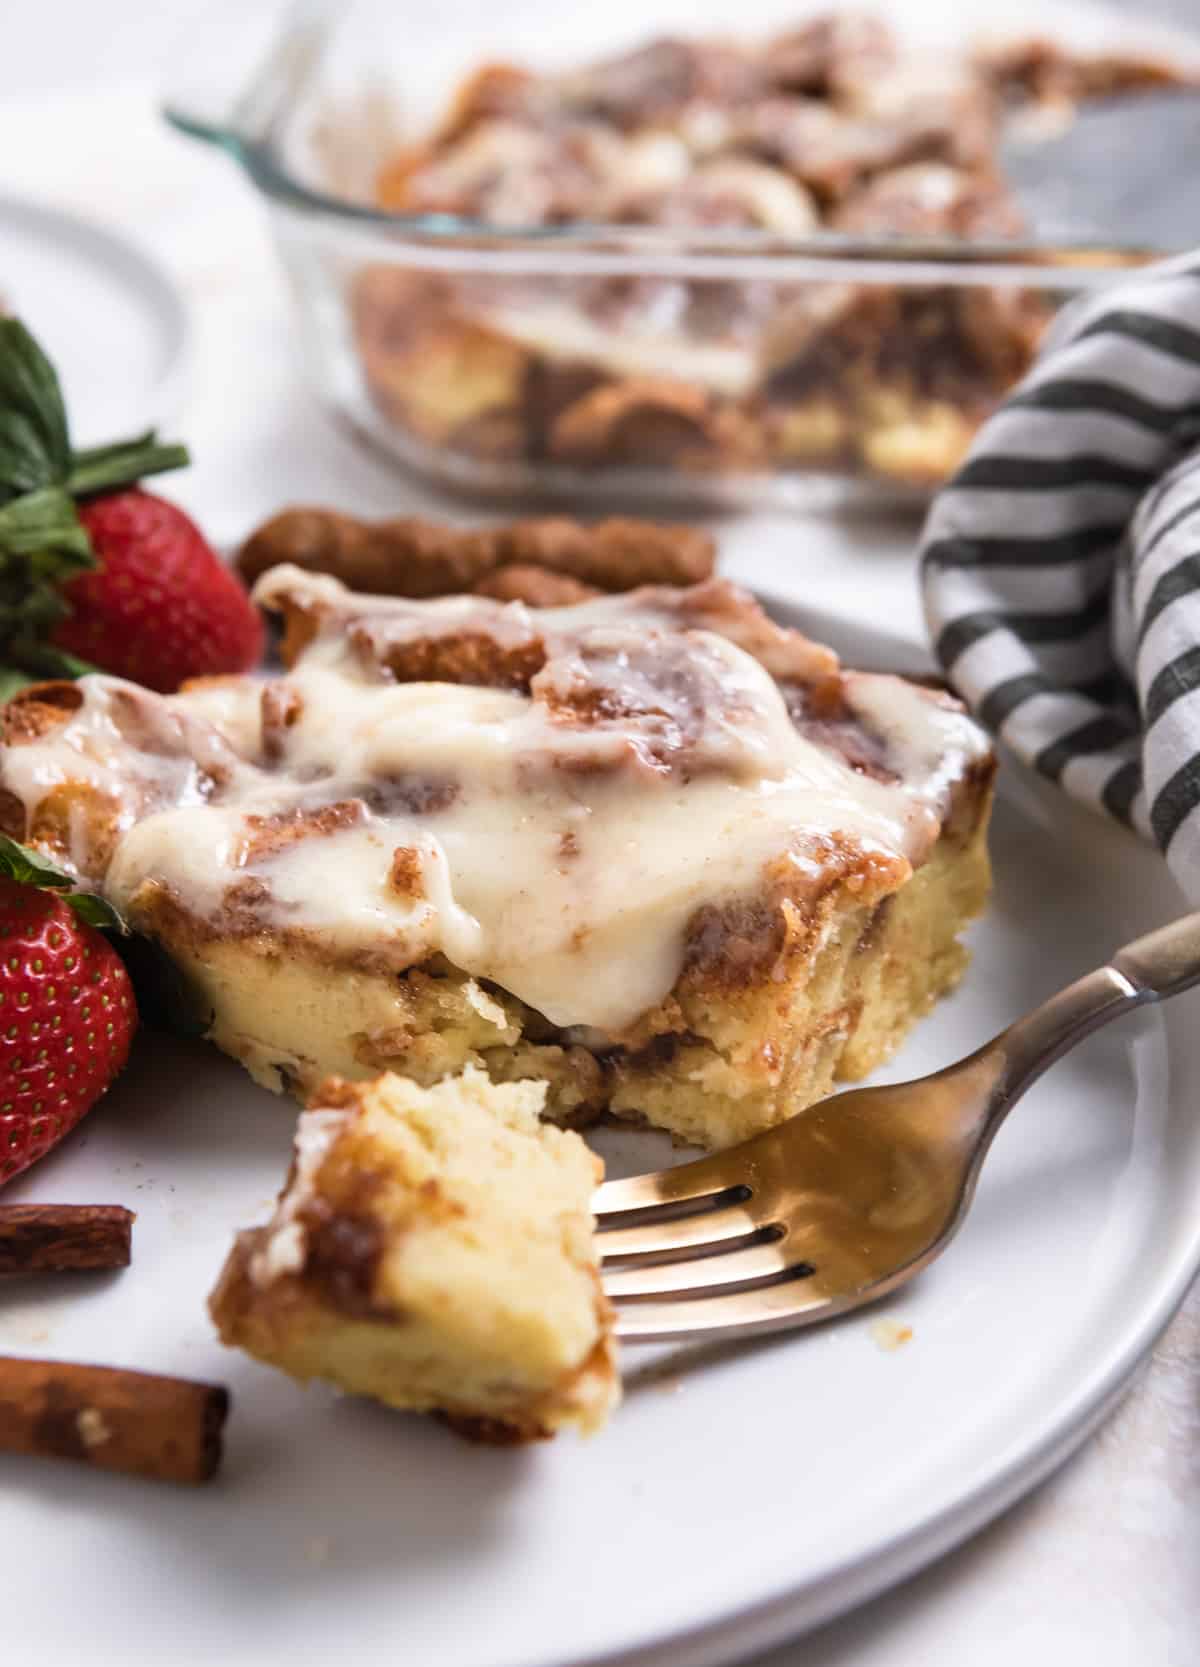 Slice of cinnamon baked french toast on plate with fork.